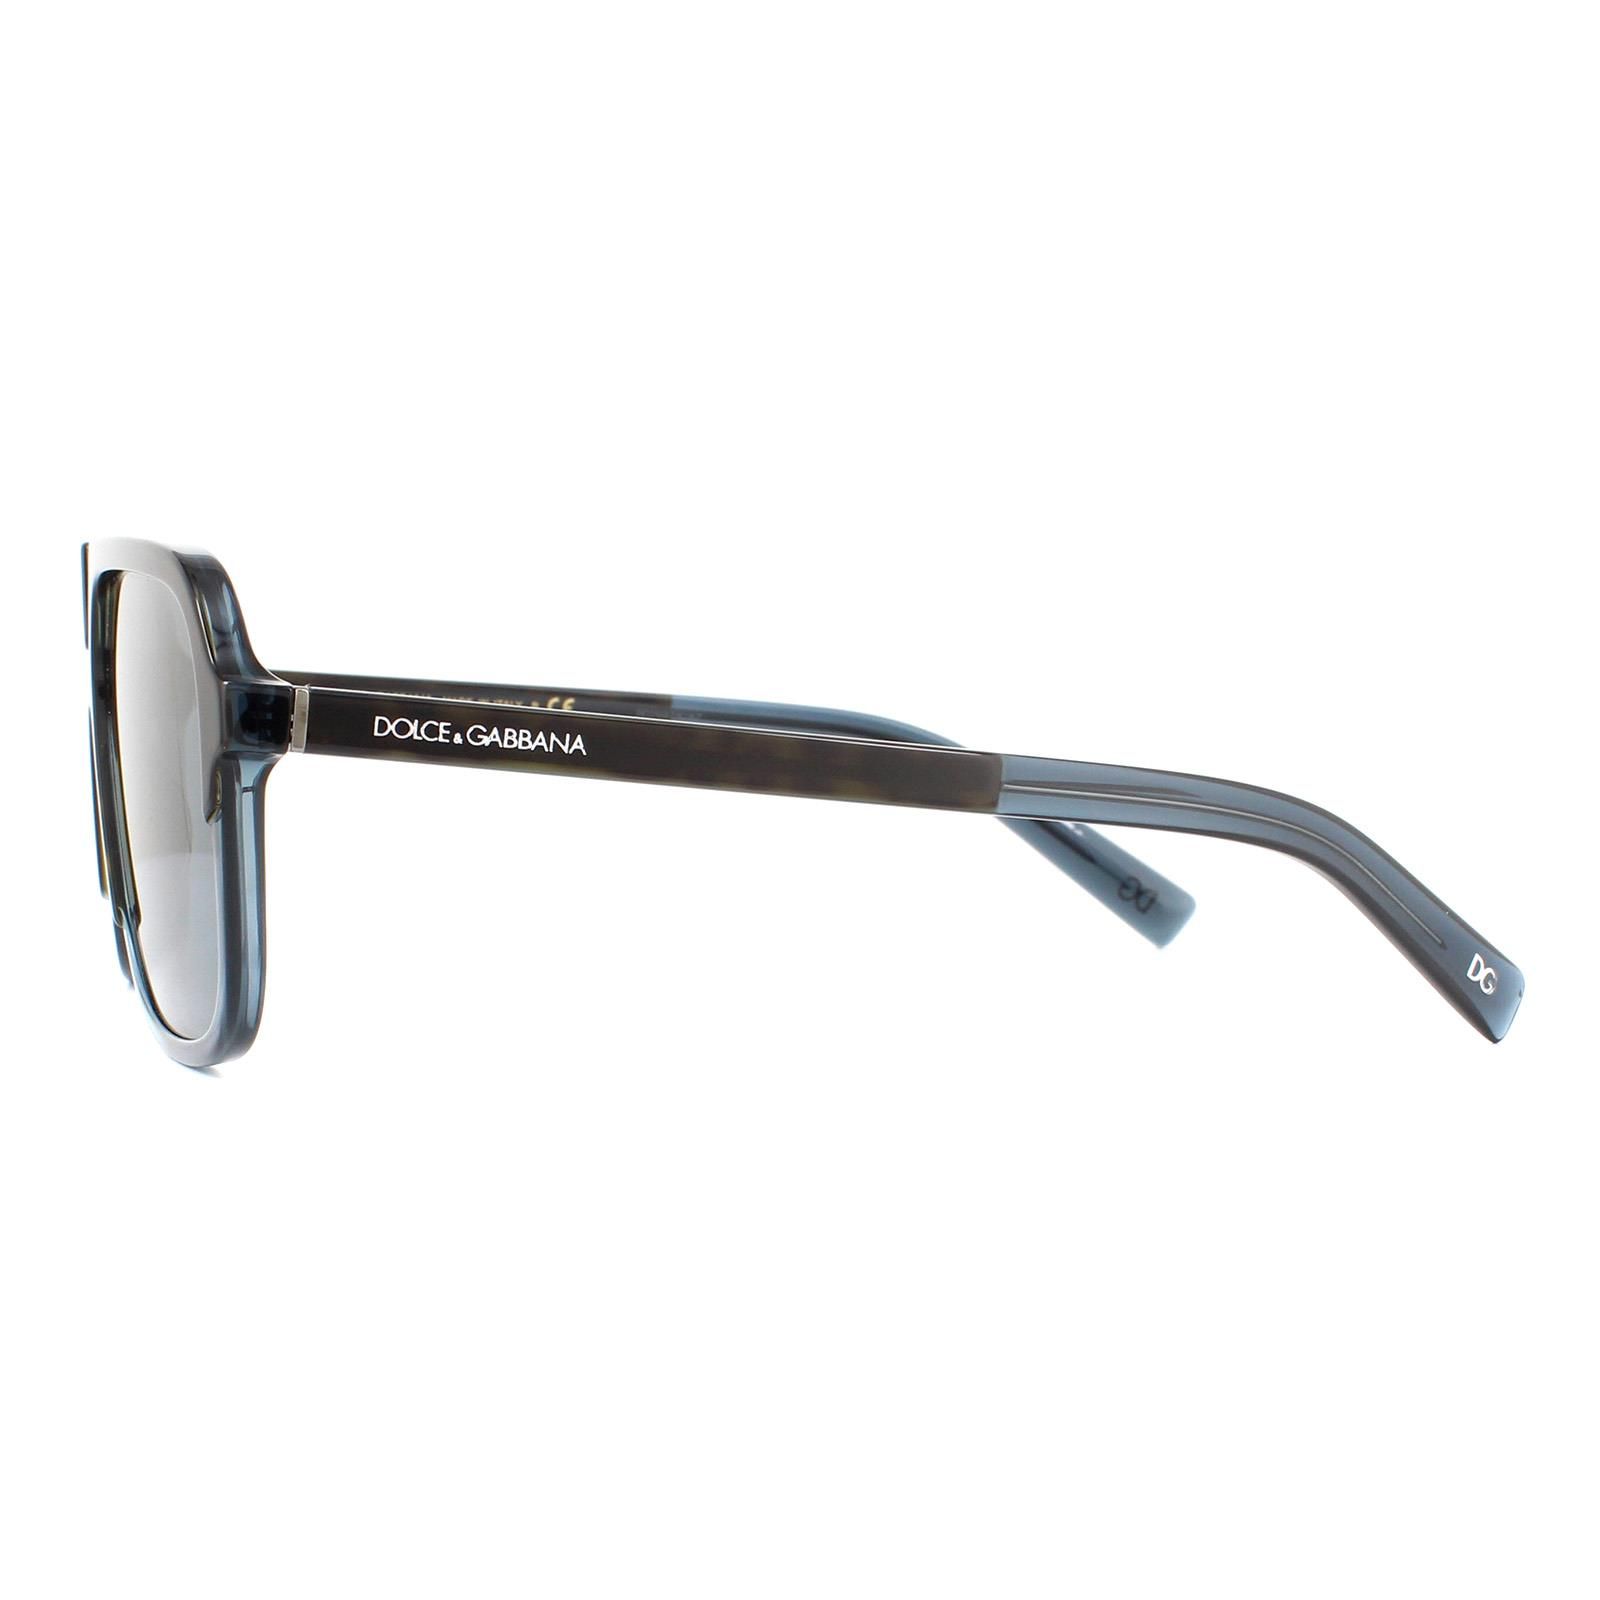 Dolce & Gabbana Sunglasses DG4354 320980 Havana Transparent Blue Brown Gradient are a full acetate square style aviator for men. The lightweight frame features the Dolce & Gabbana text logo on each of the hinges an d the brow bar. The DG logo is also featured at each of the temple tips. The 4354 are a sleek and contemporary style that will guarantee you stand out from the crowd!